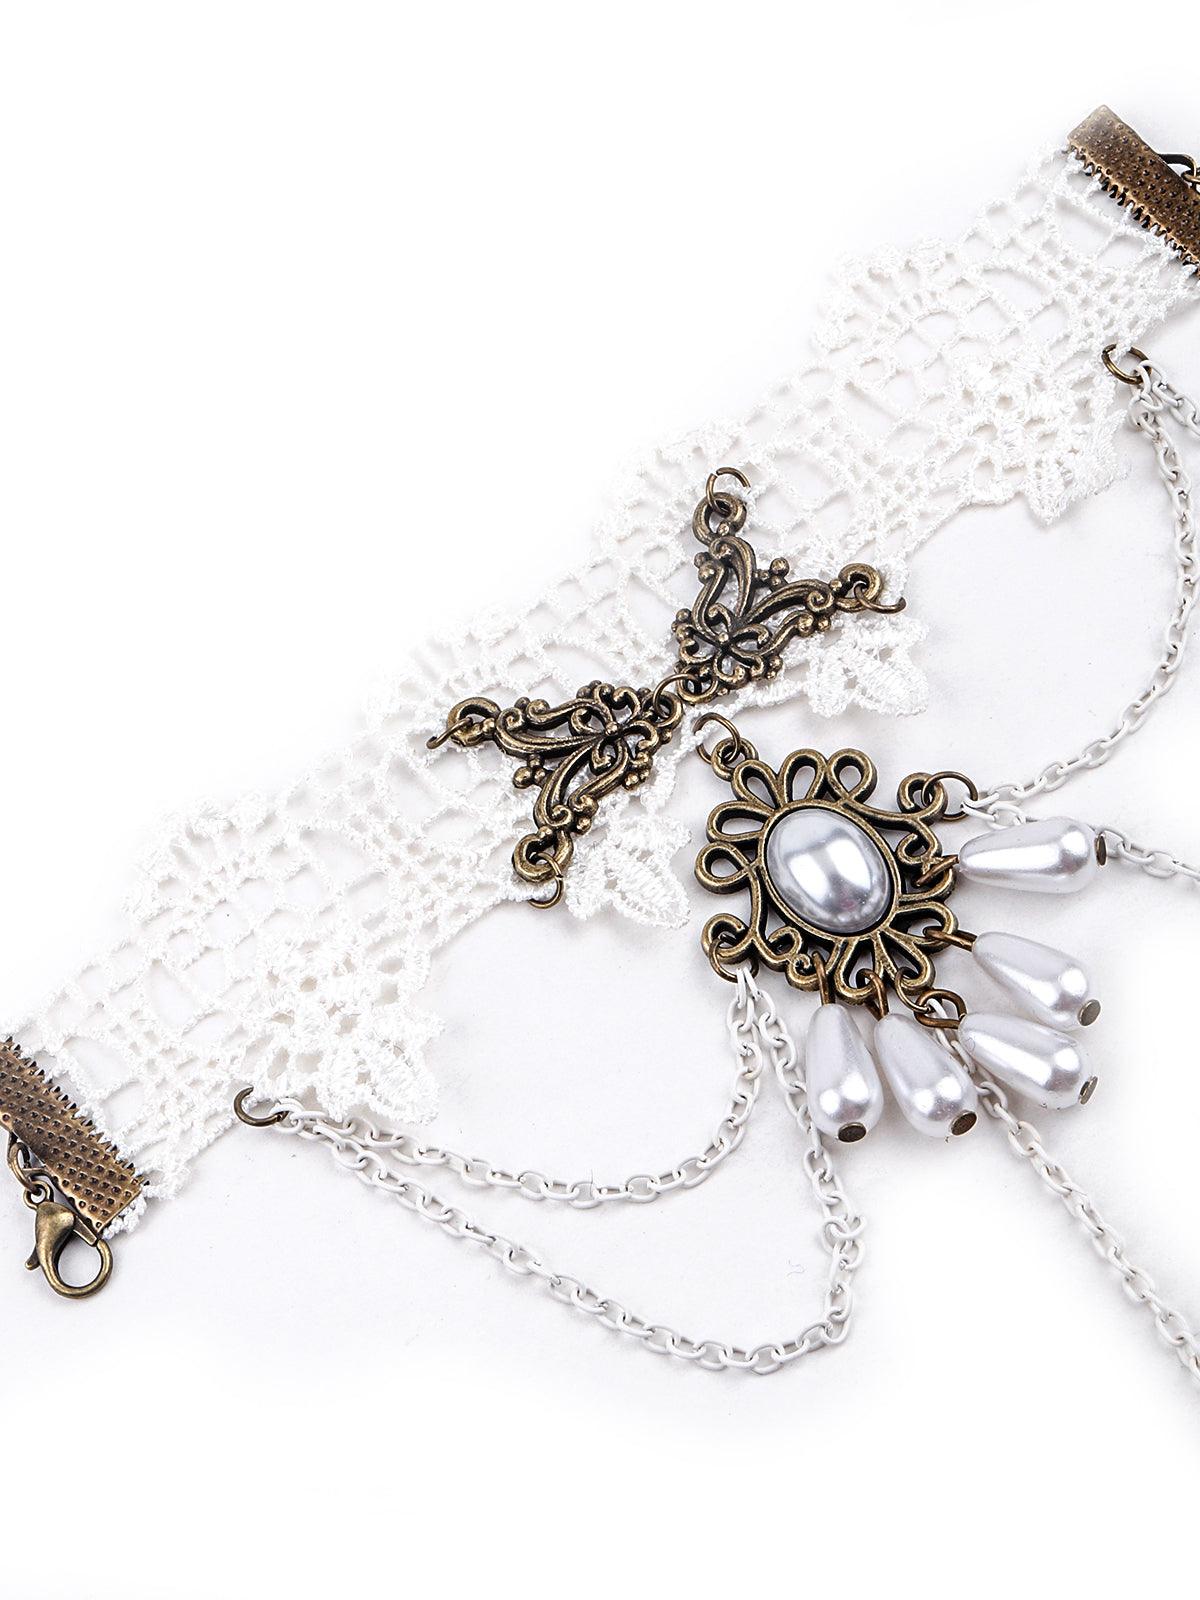 White lace bracelet secured with a ring chain - Odette